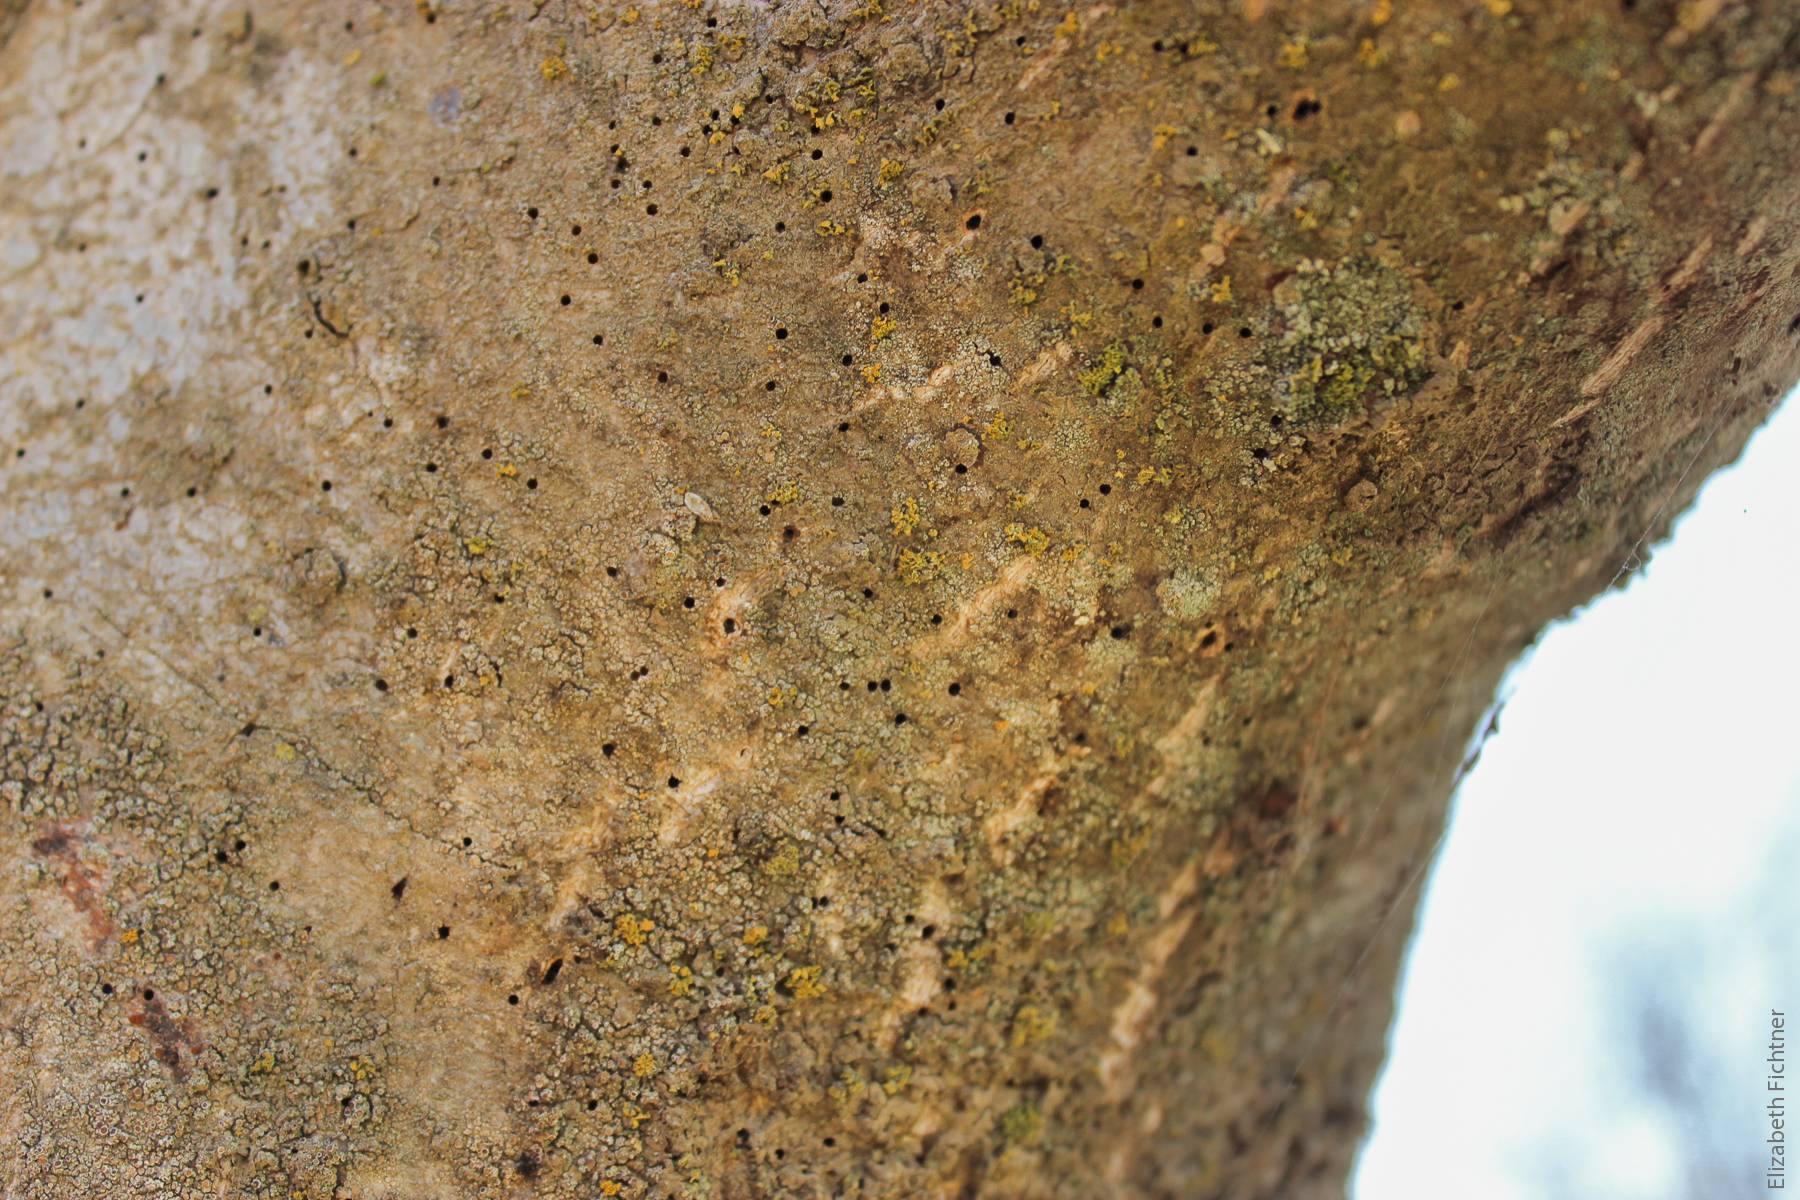 Characteristic entry and exit holes of the walnut twig beetle in the trunk of an English walnut tree in Tulare County. The holes are less than 1 millimeter in diameter.